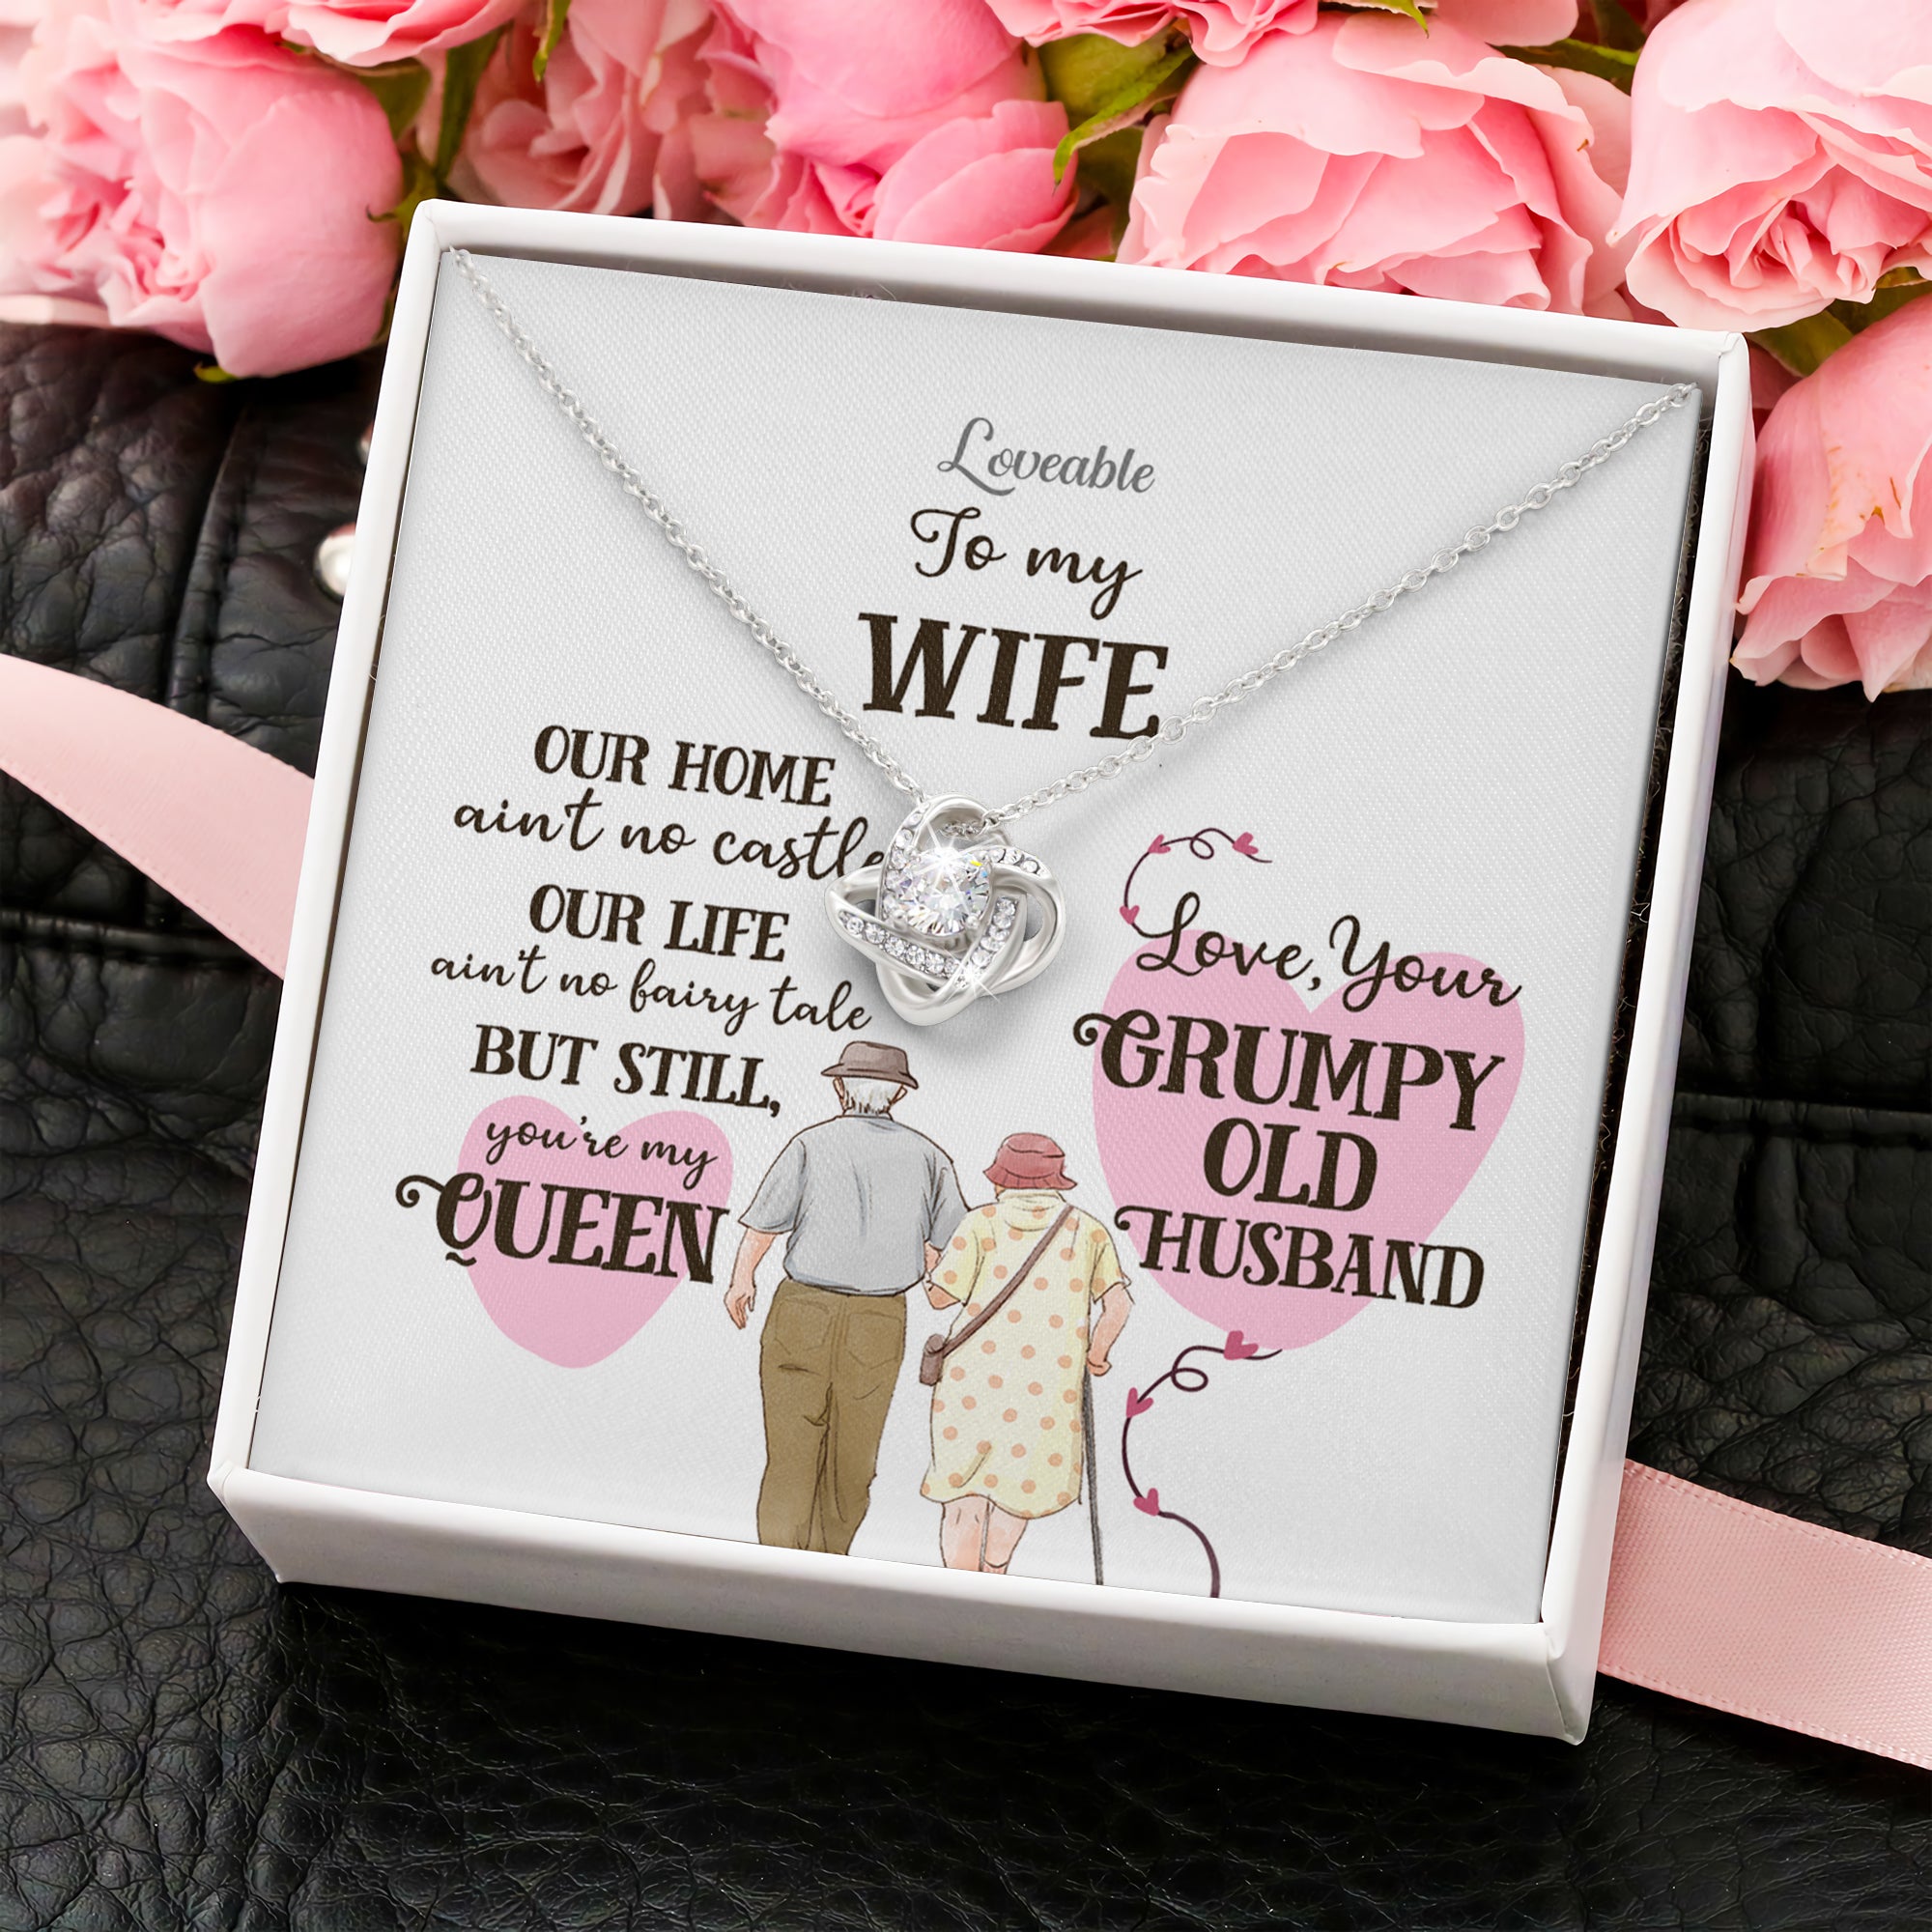 To my Wife, You're my Queen - Best gift from Grumpy Old Husband